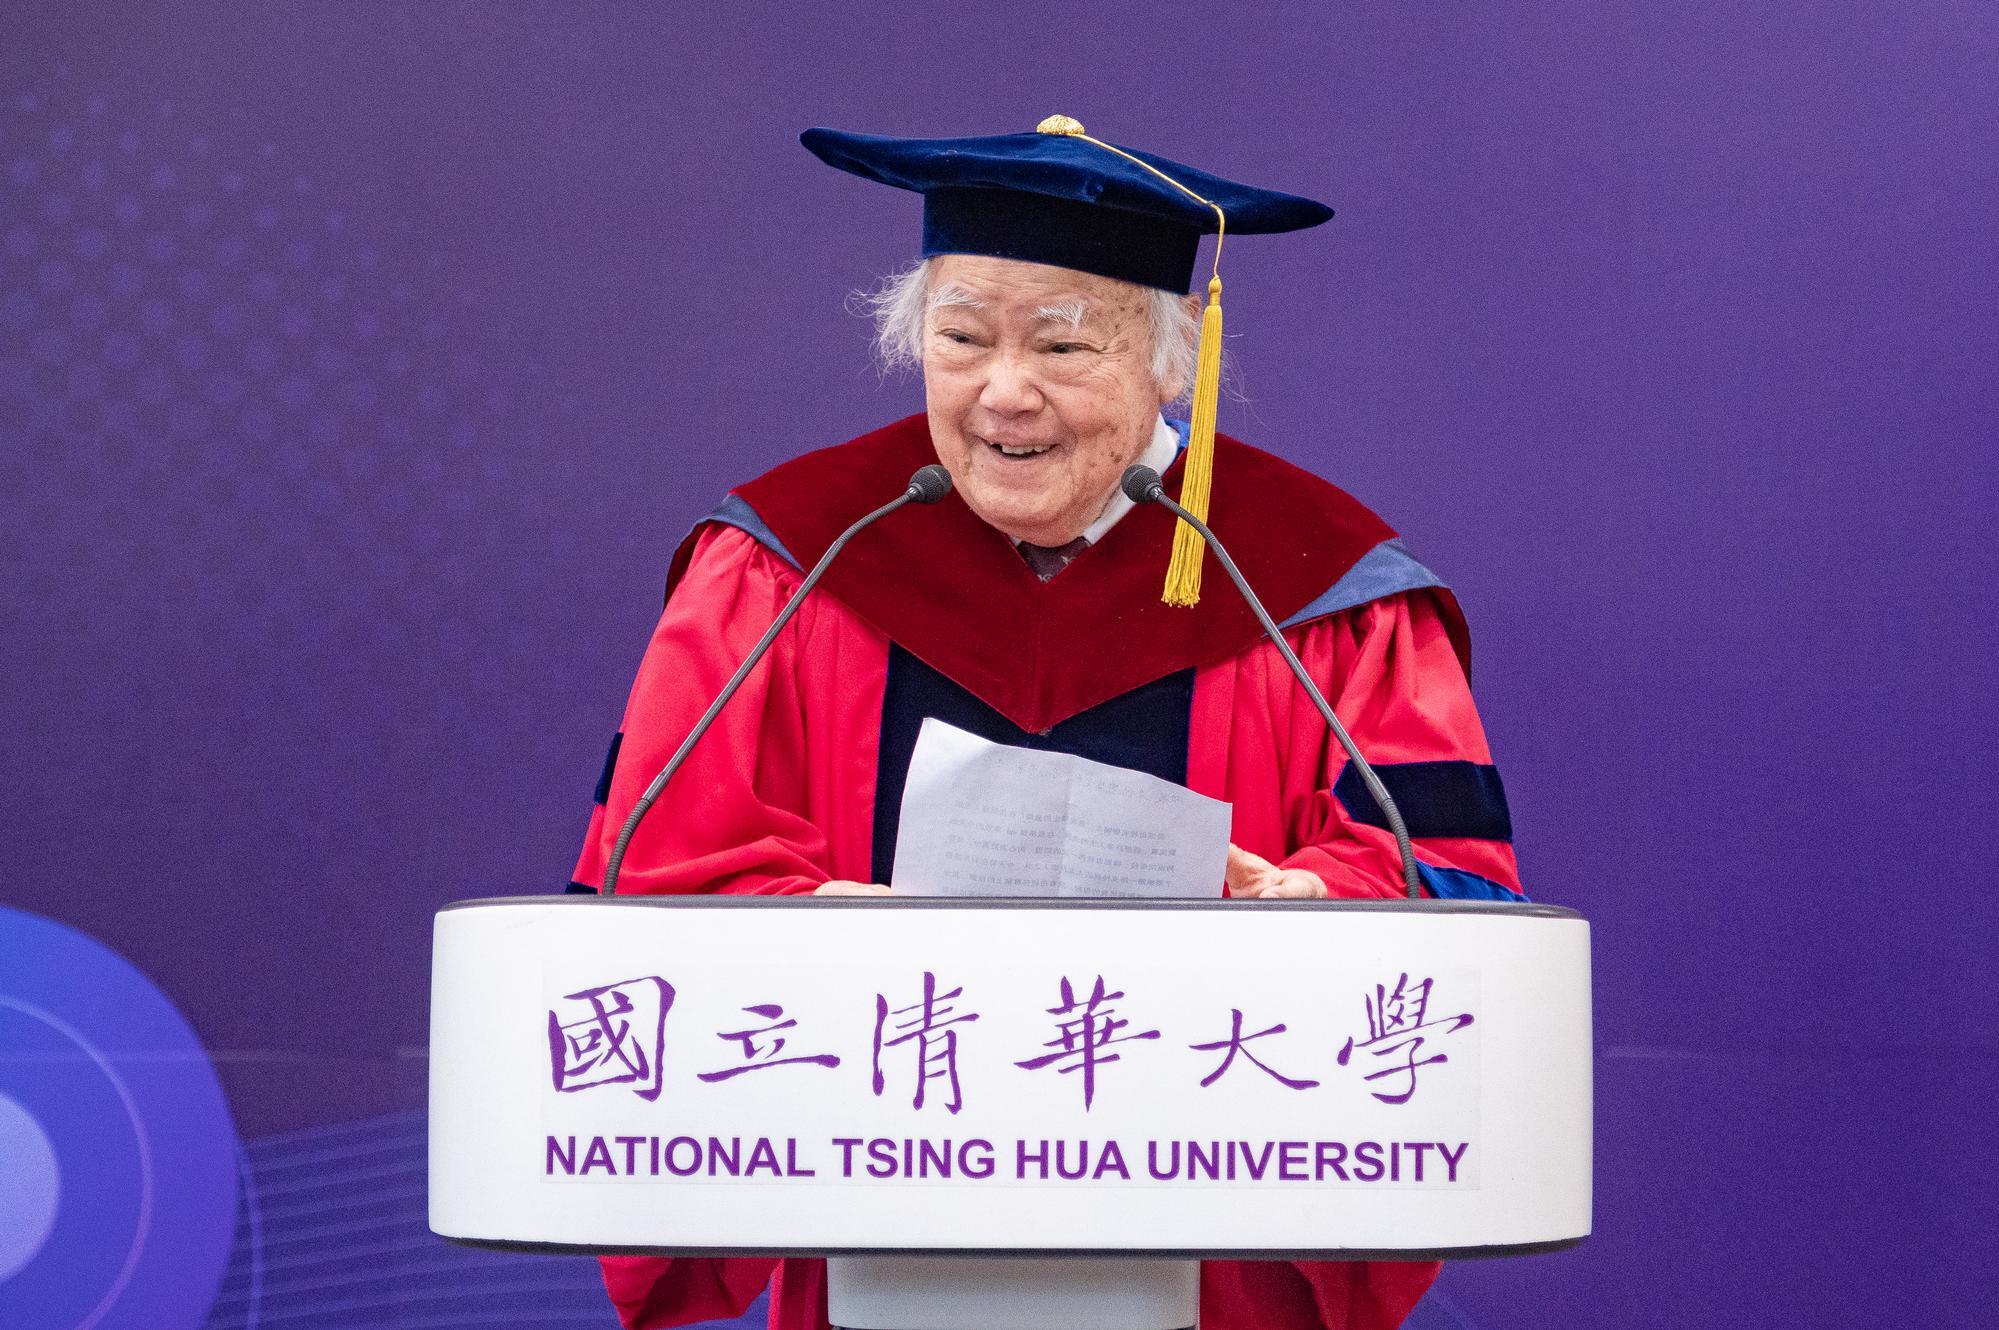 NTHU conferred an honorary doctorate upon Dr. Yi-Fa Lee (李義發) on November 14.